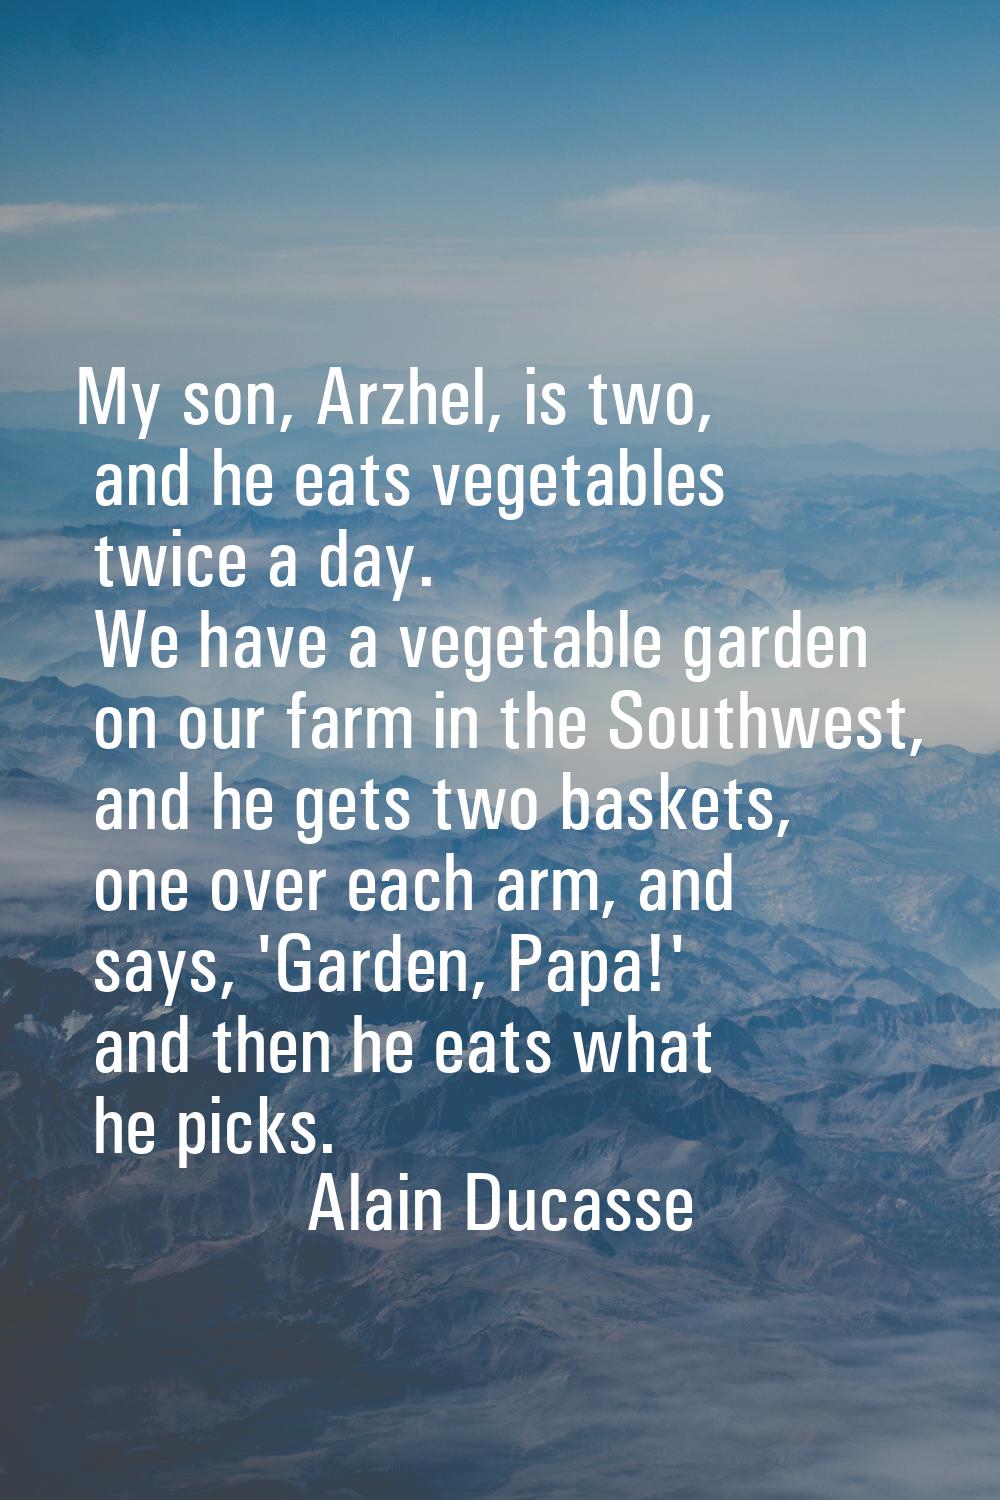 My son, Arzhel, is two, and he eats vegetables twice a day. We have a vegetable garden on our farm 